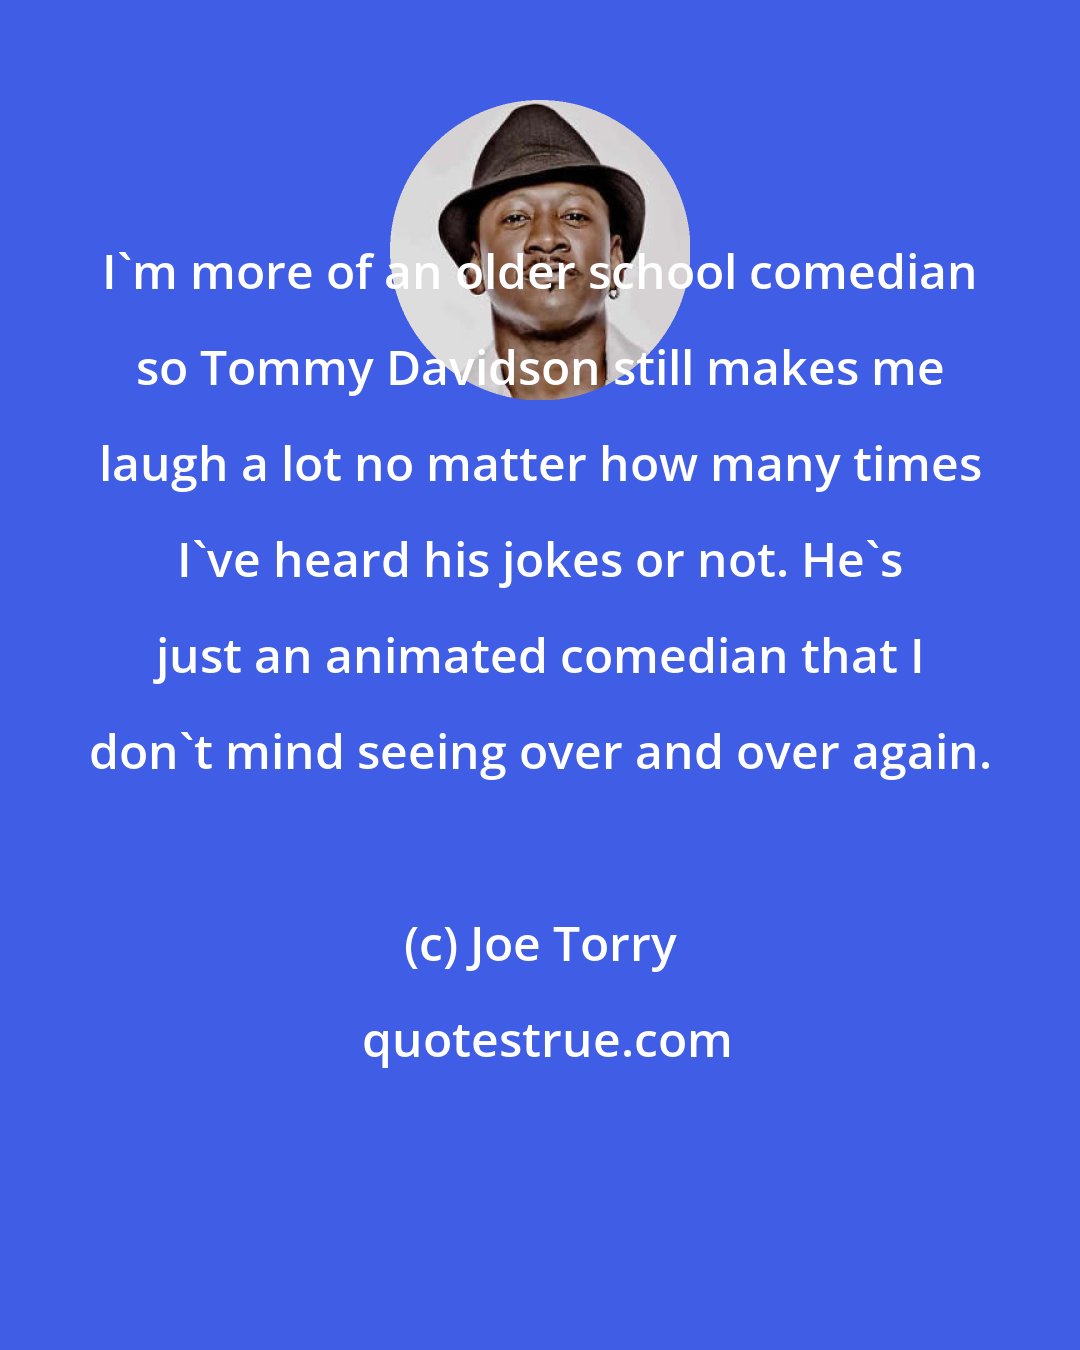 Joe Torry: I'm more of an older school comedian so Tommy Davidson still makes me laugh a lot no matter how many times I've heard his jokes or not. He's just an animated comedian that I don't mind seeing over and over again.